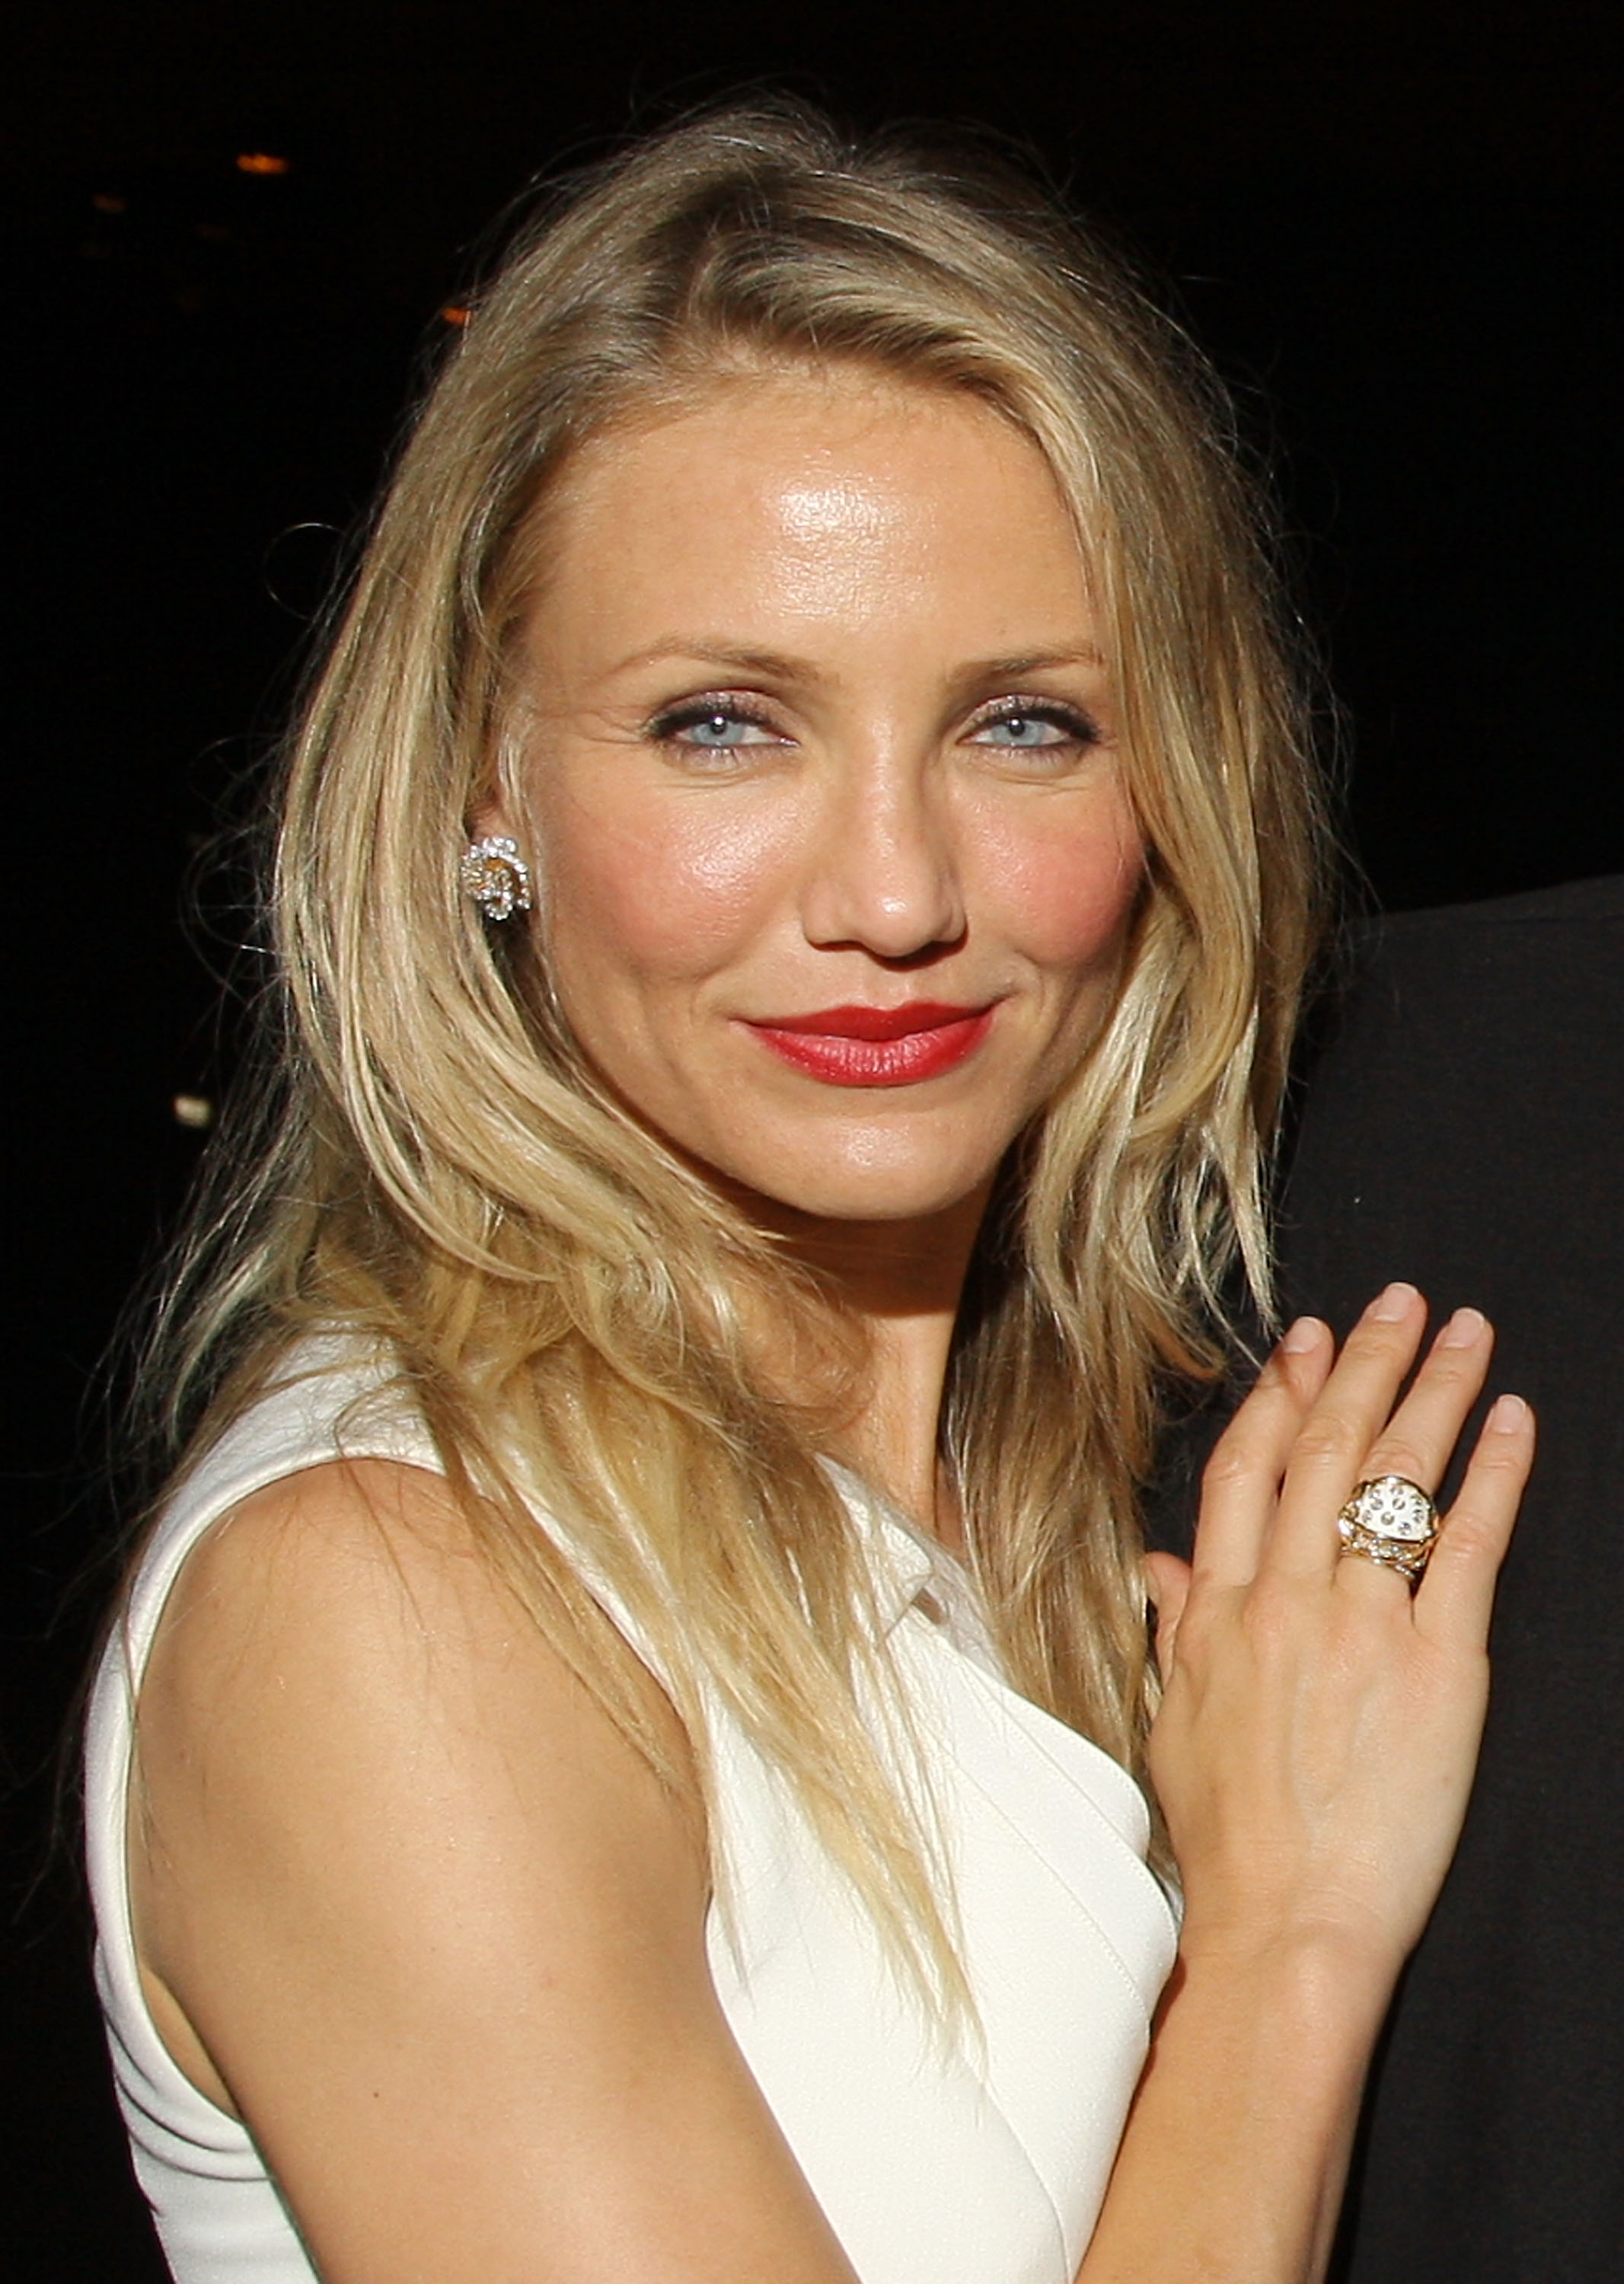 Cameron Diaz attends the after party for the New York premiere of 